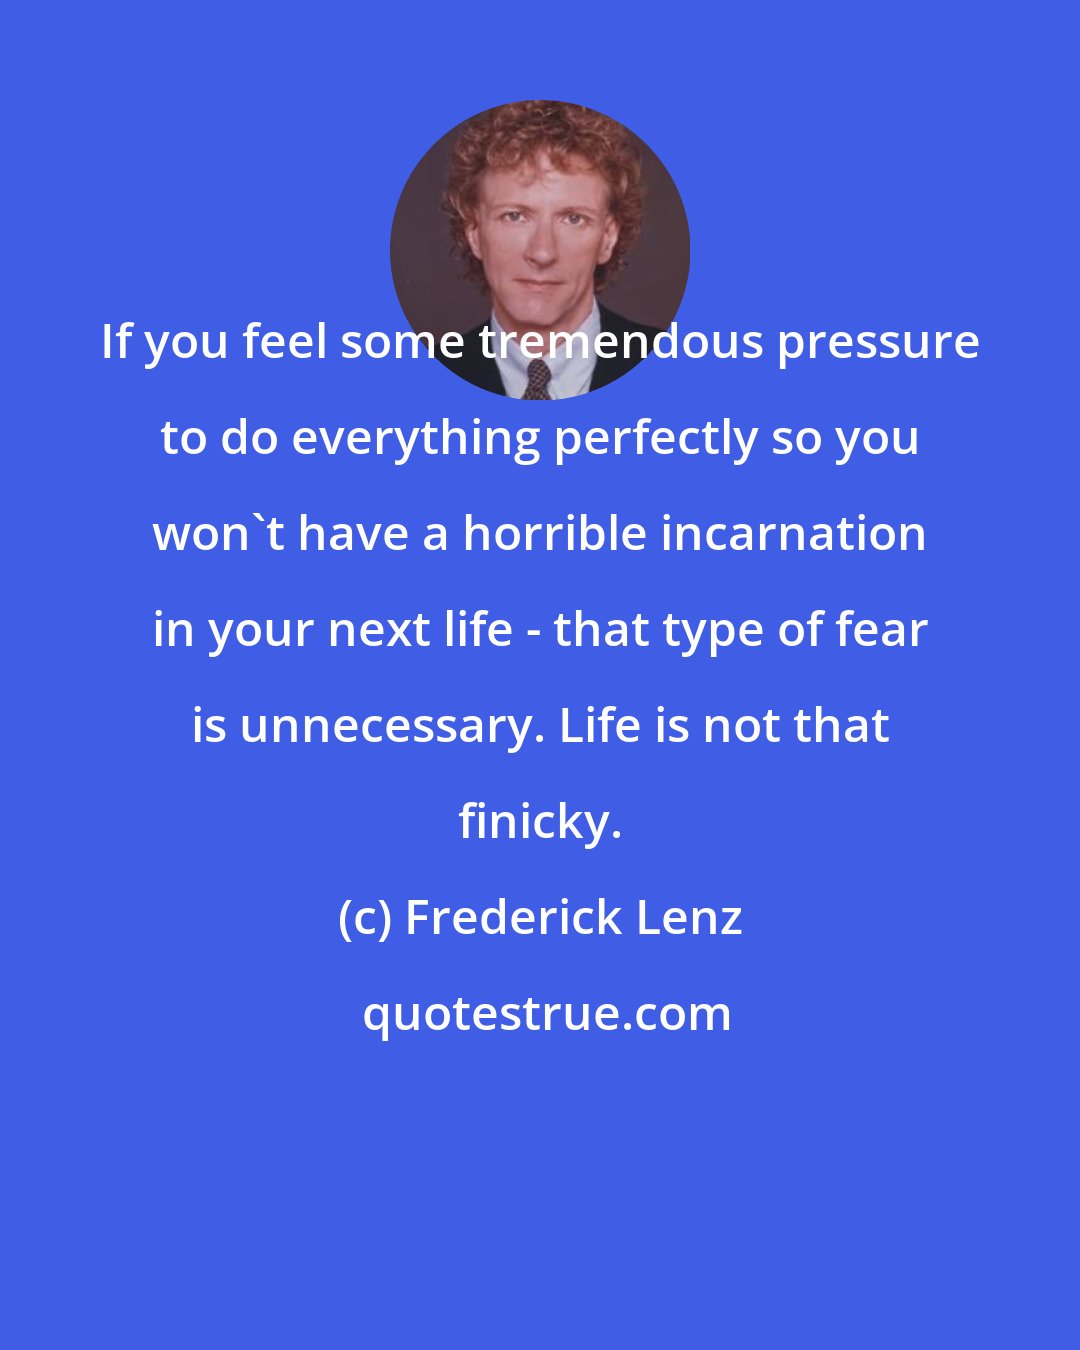 Frederick Lenz: If you feel some tremendous pressure to do everything perfectly so you won't have a horrible incarnation in your next life - that type of fear is unnecessary. Life is not that finicky.